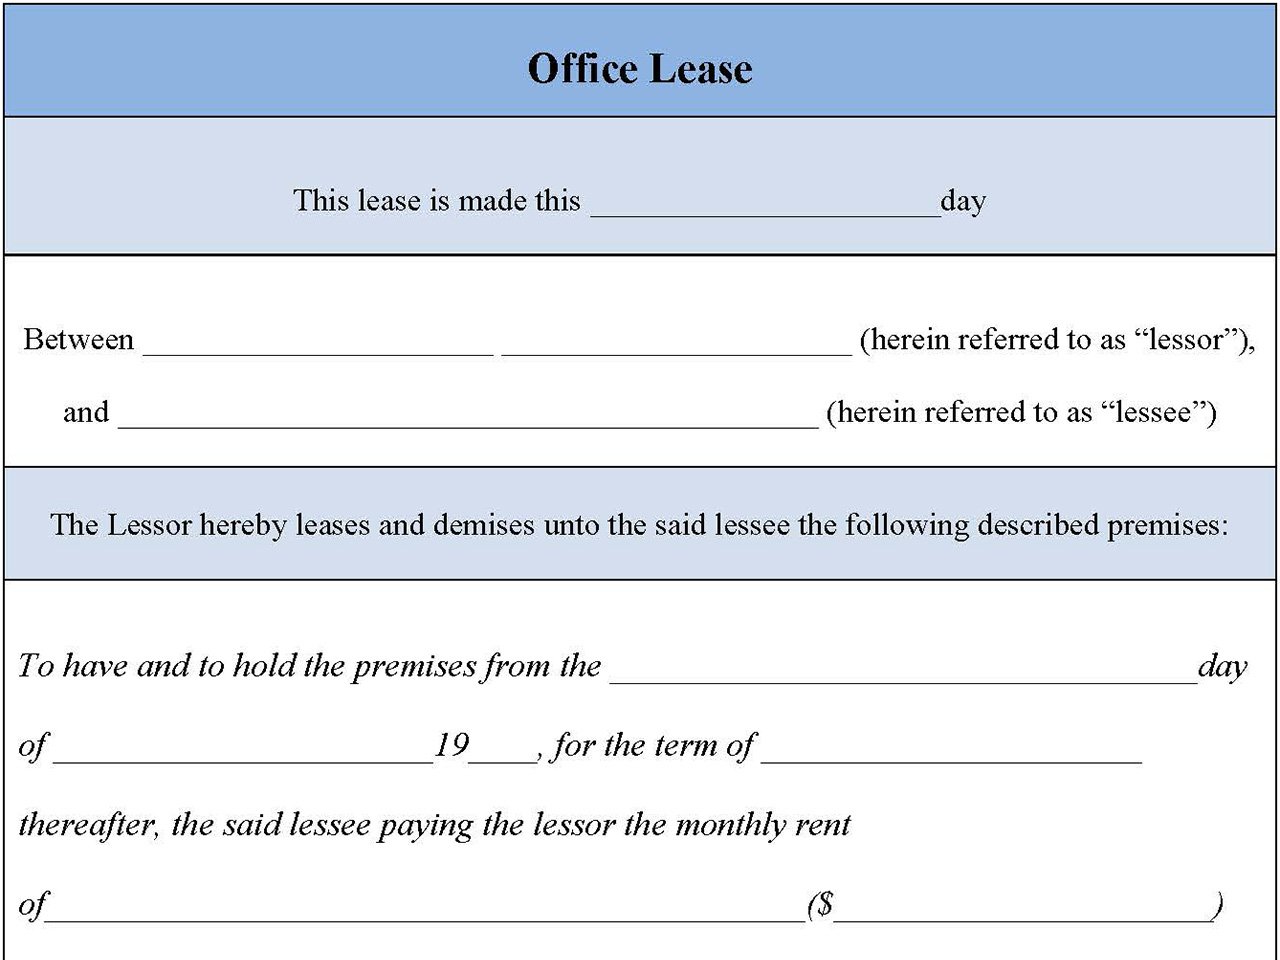 Office Lease Form